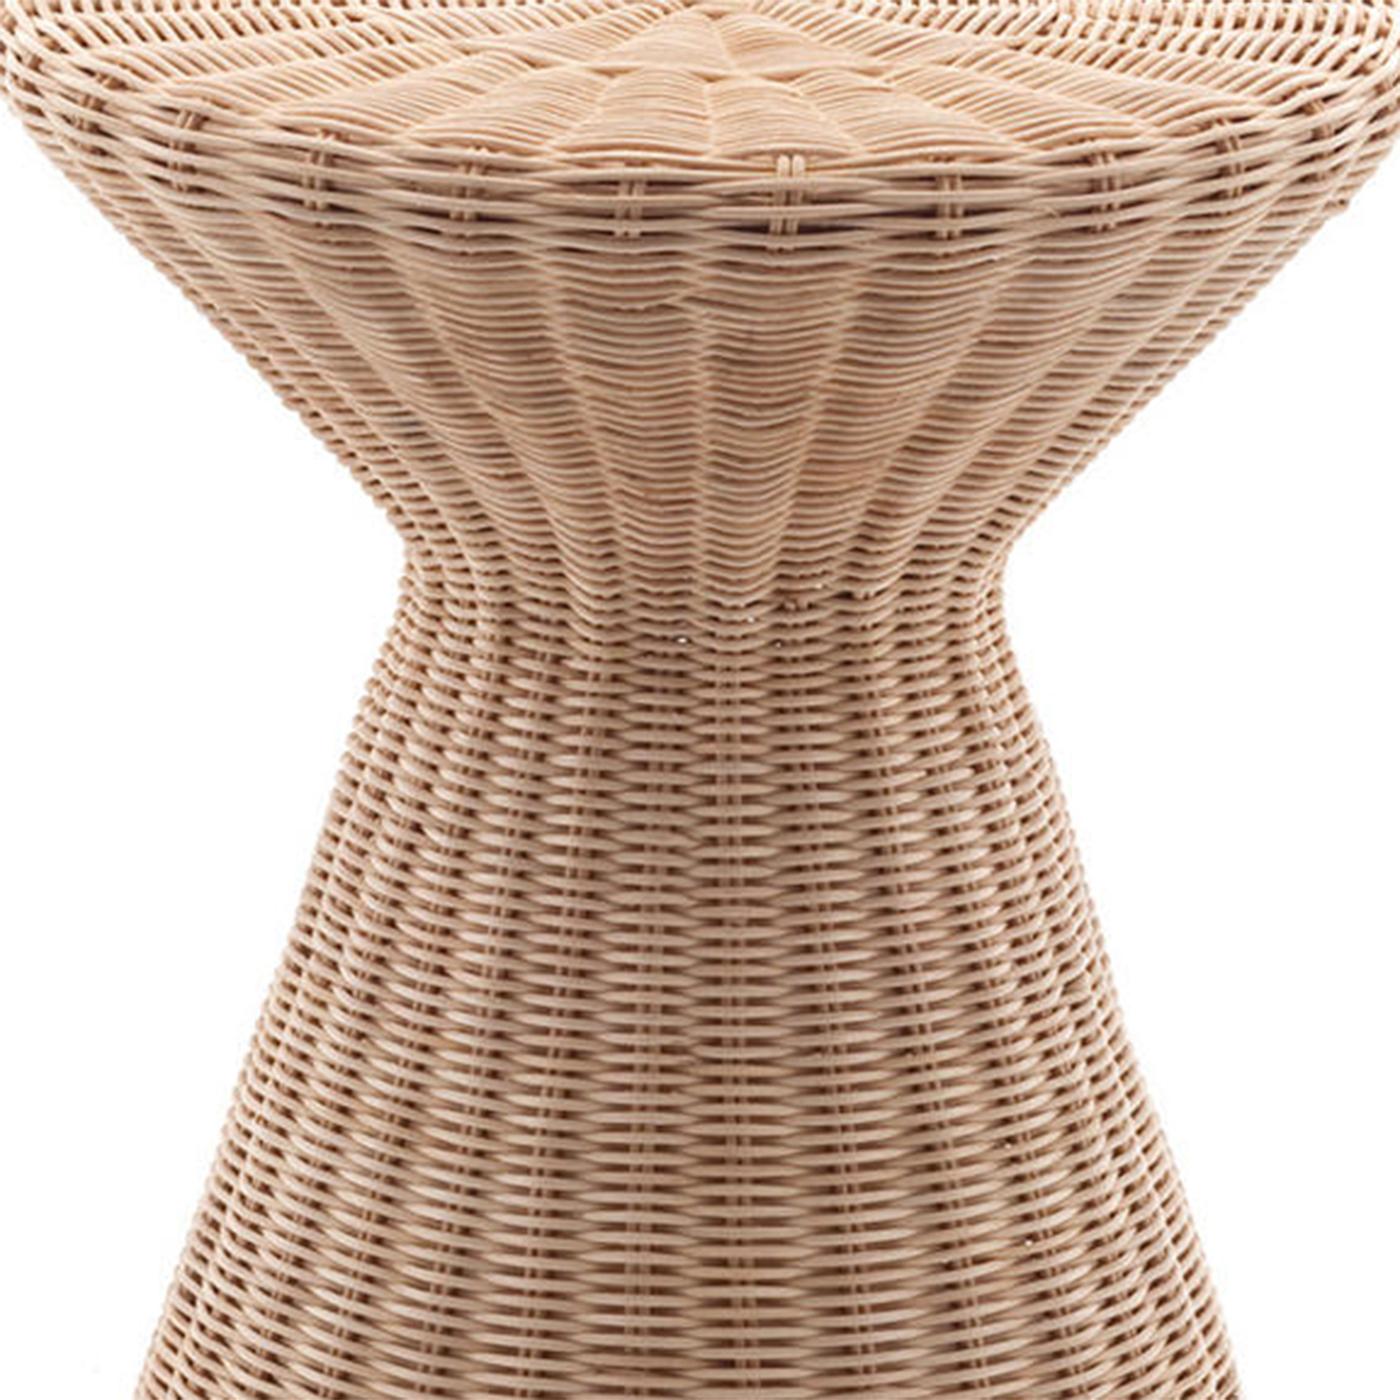 Italian Coil Natural Side Table For Sale